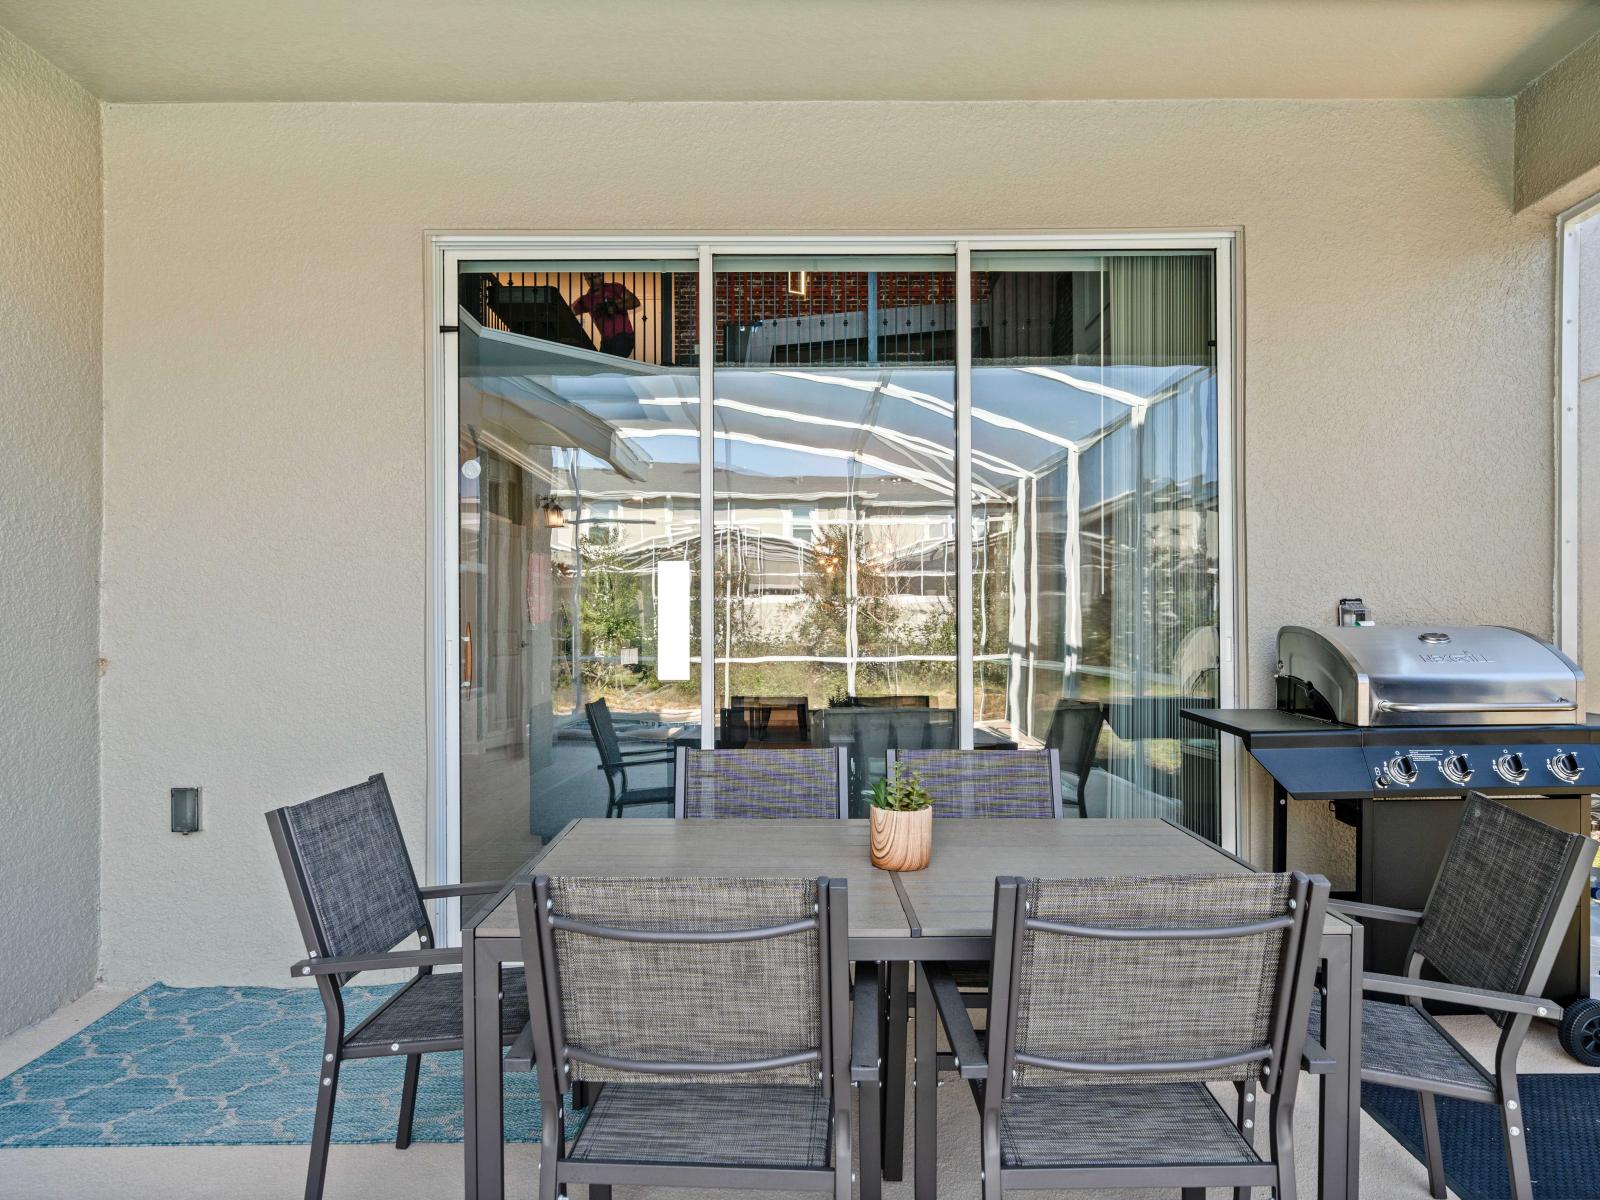 Outdoor dining of the Home in Davenport Florida - Al Fresco Dining Paradise - Enjoy the perfect blend of indoor comfort and outdoor beauty in our dining area - Pool becomes your picturesque backdrop